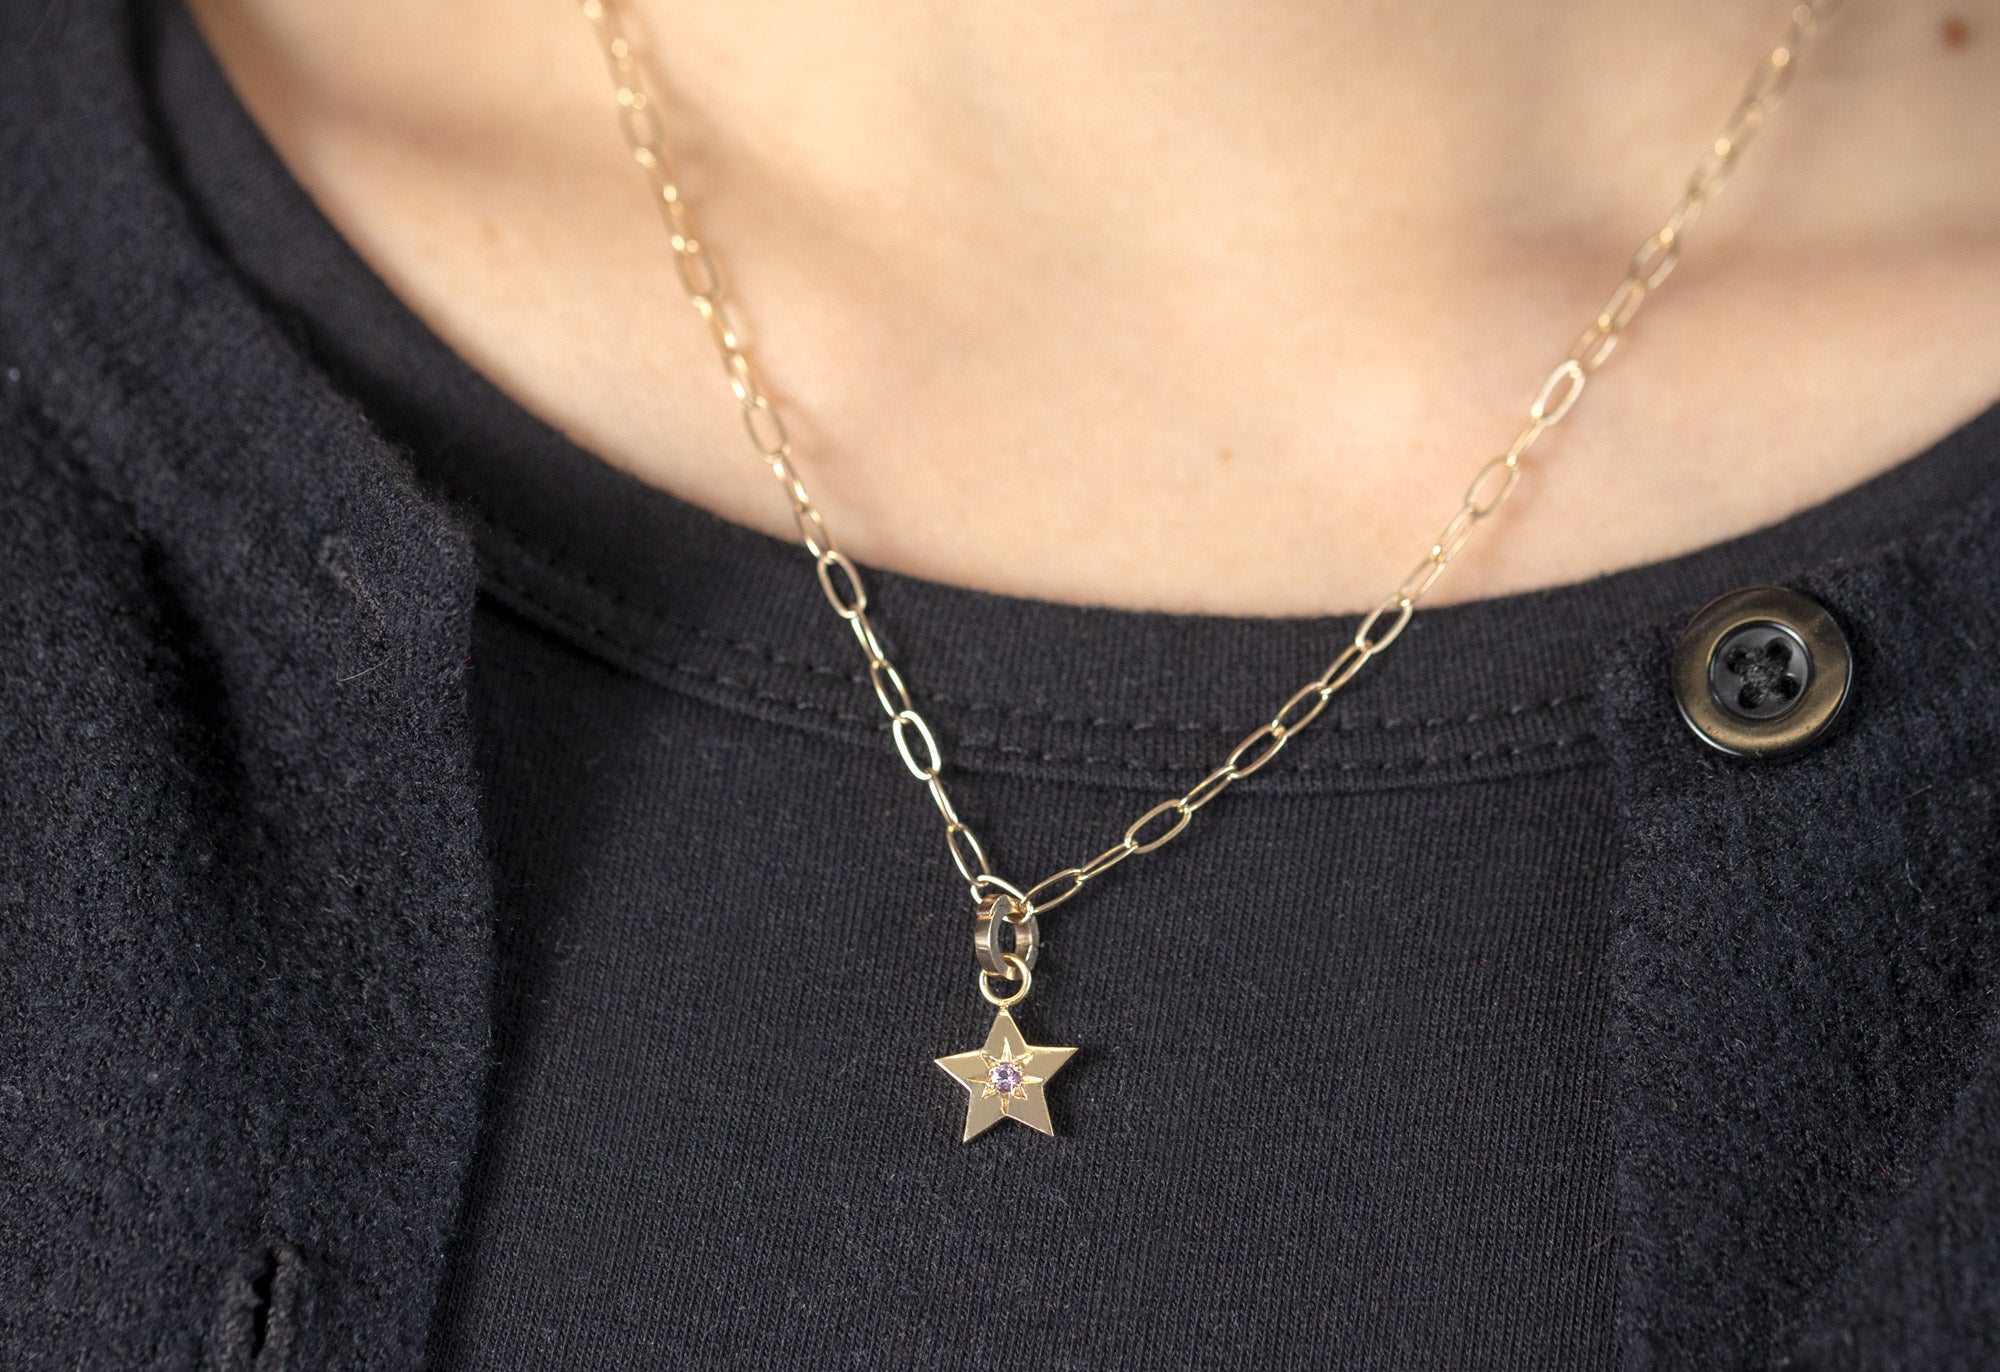 10k Yellow Gold Star Charm on Charm Necklace on Model